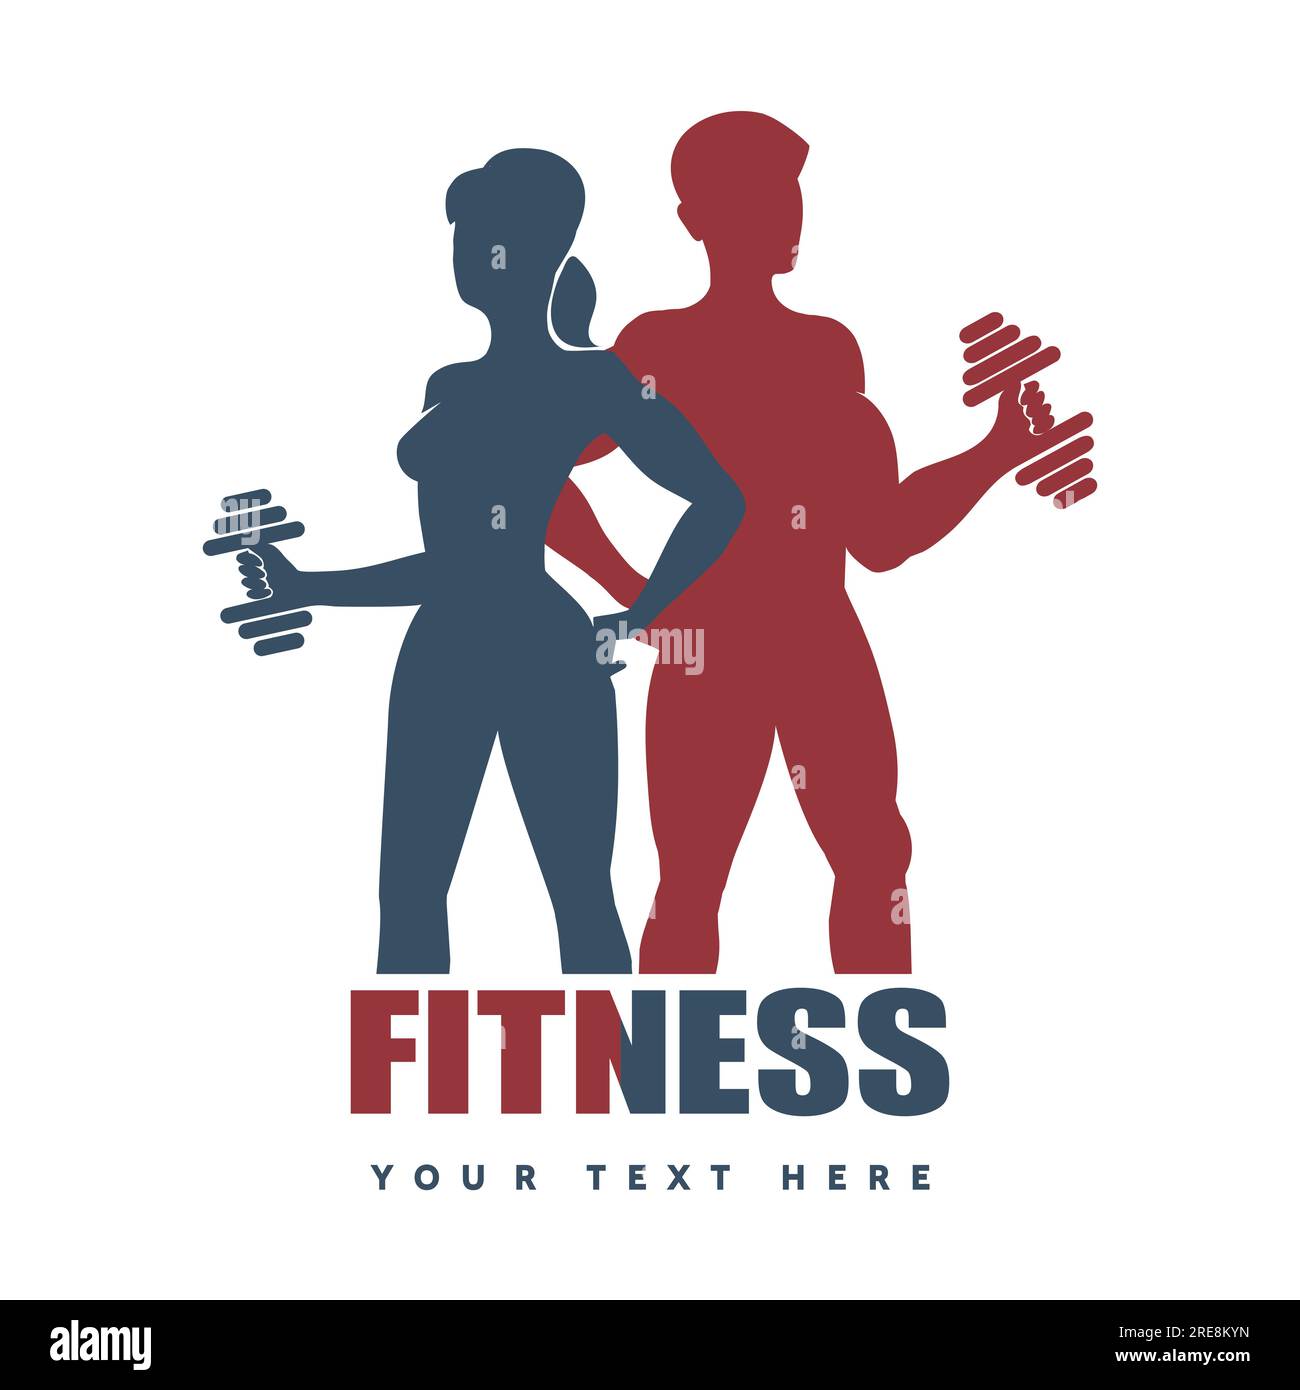 Fitness club logo or emblem. Strong Woman and Man Silhouettes Holds Dumbbells. Isolated on white background. Stock Vector